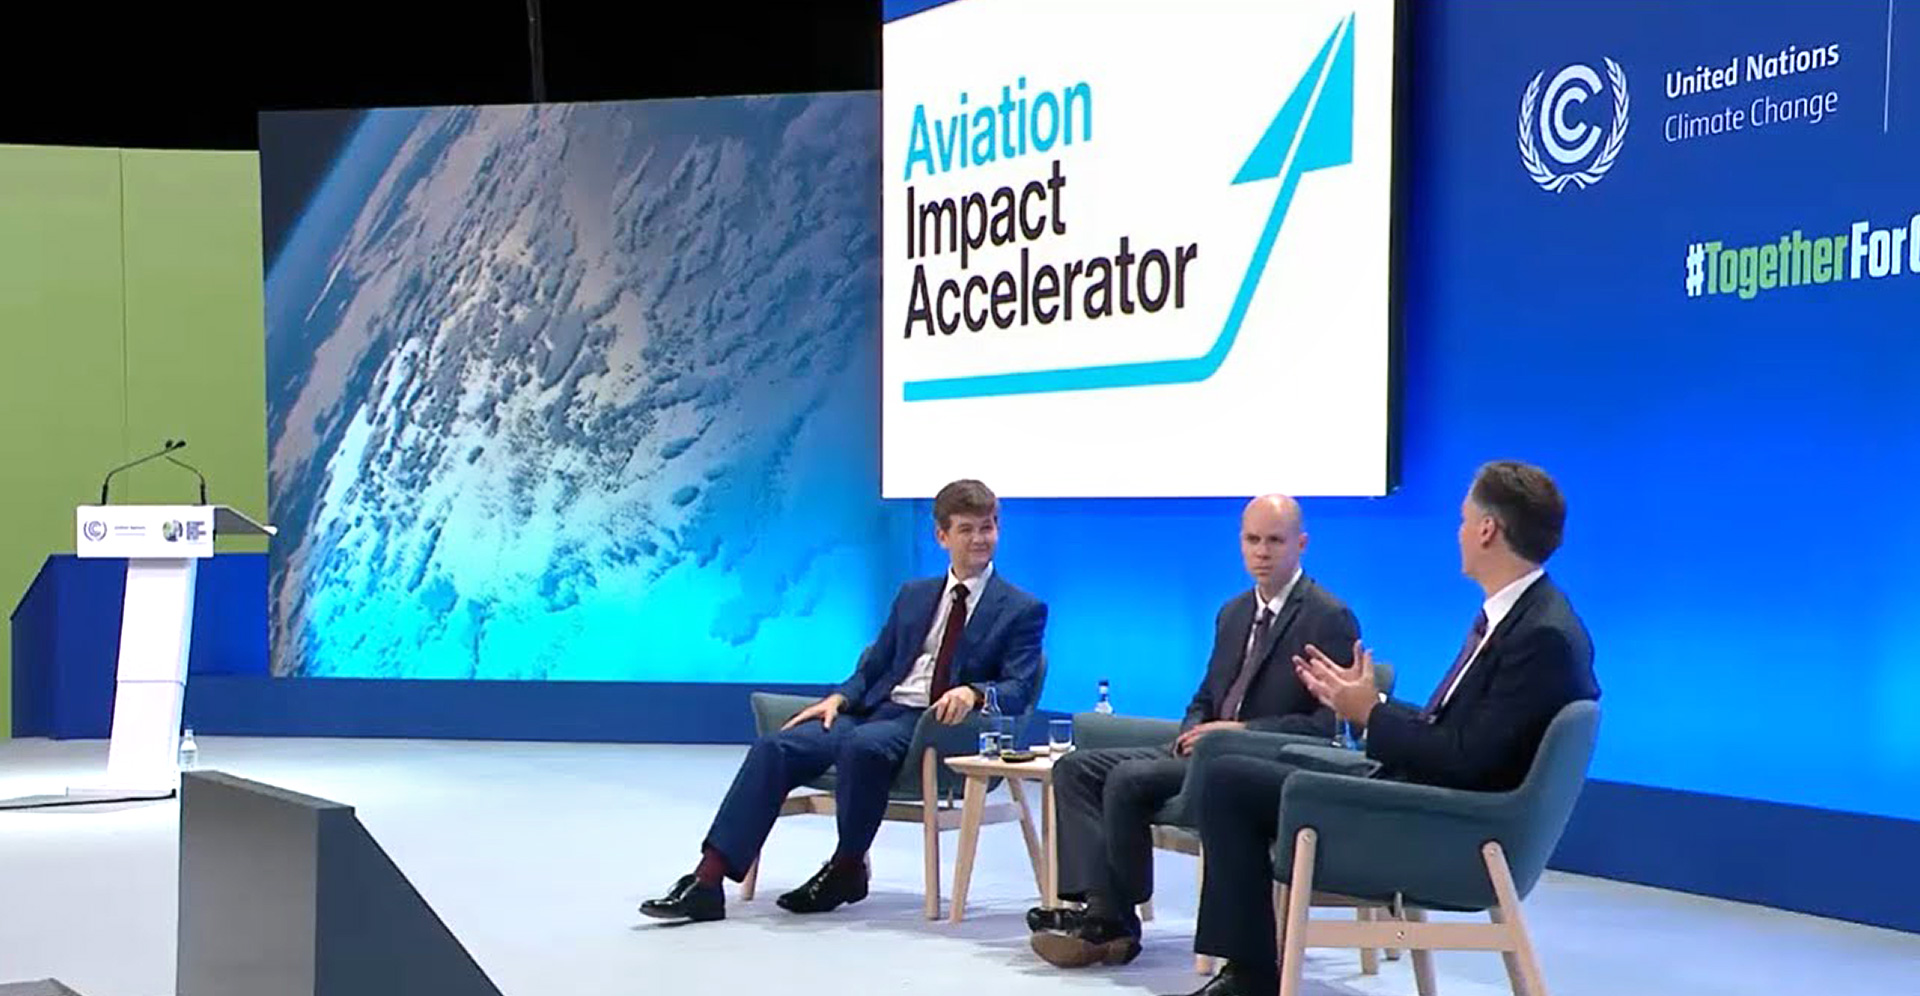 Prof Rob Miller (Whittle Lab Director), Eliot Whittington (Policy Director, CISL) and John Holland-Kaye (CEO, Heathrow) at the launch of the AIA at COP26, Glasgow, November 2021  
